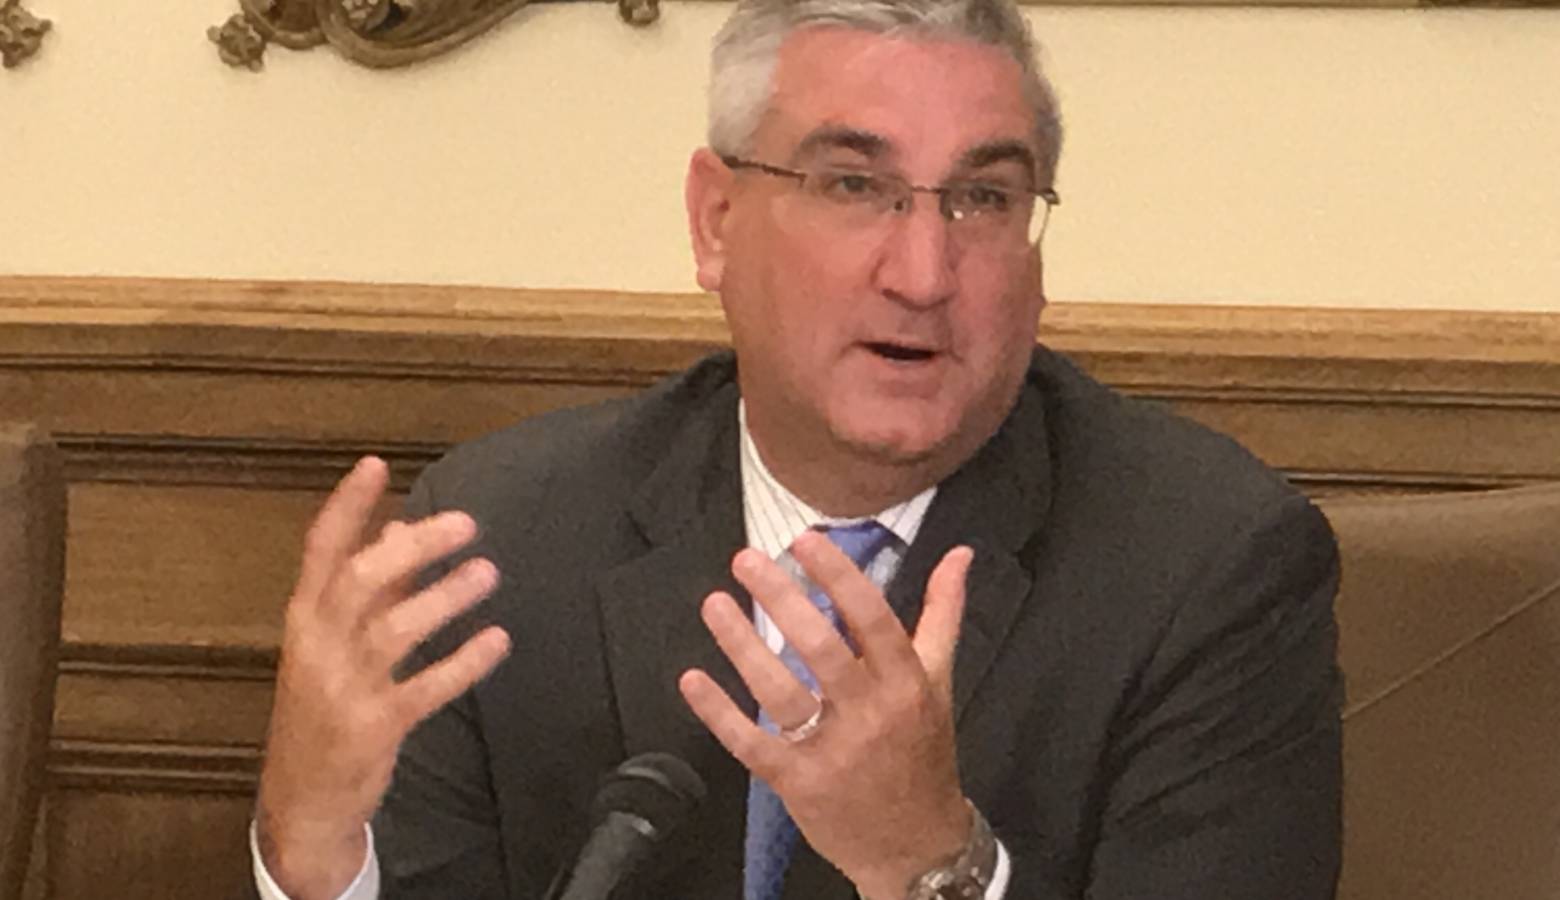 Gov. Eric Holcomb says he had no choice but to call for Attorney General Curtis Hill’s resignation. (Brandon Smith/IPB News)